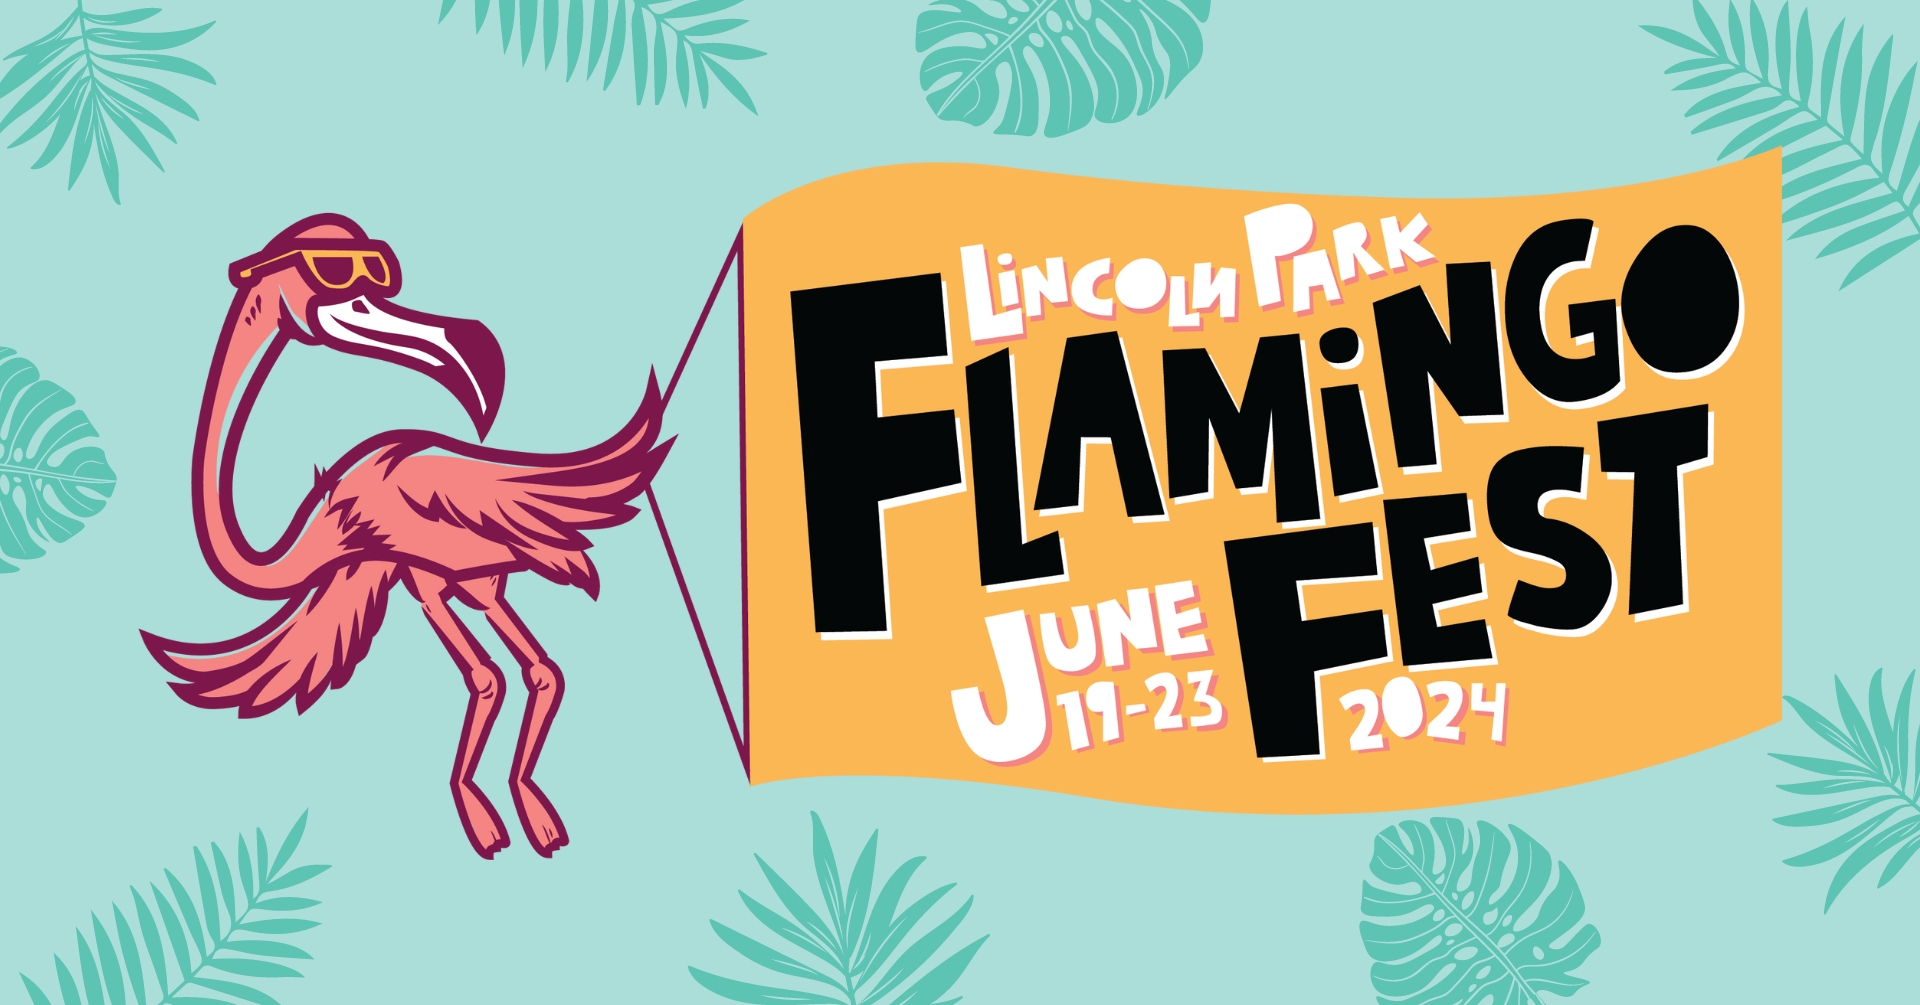 Graphic of cartoon flamingo flying with a banner. Banner reads "Lincoln Park Flamingo Fest, June 19-23 2024"